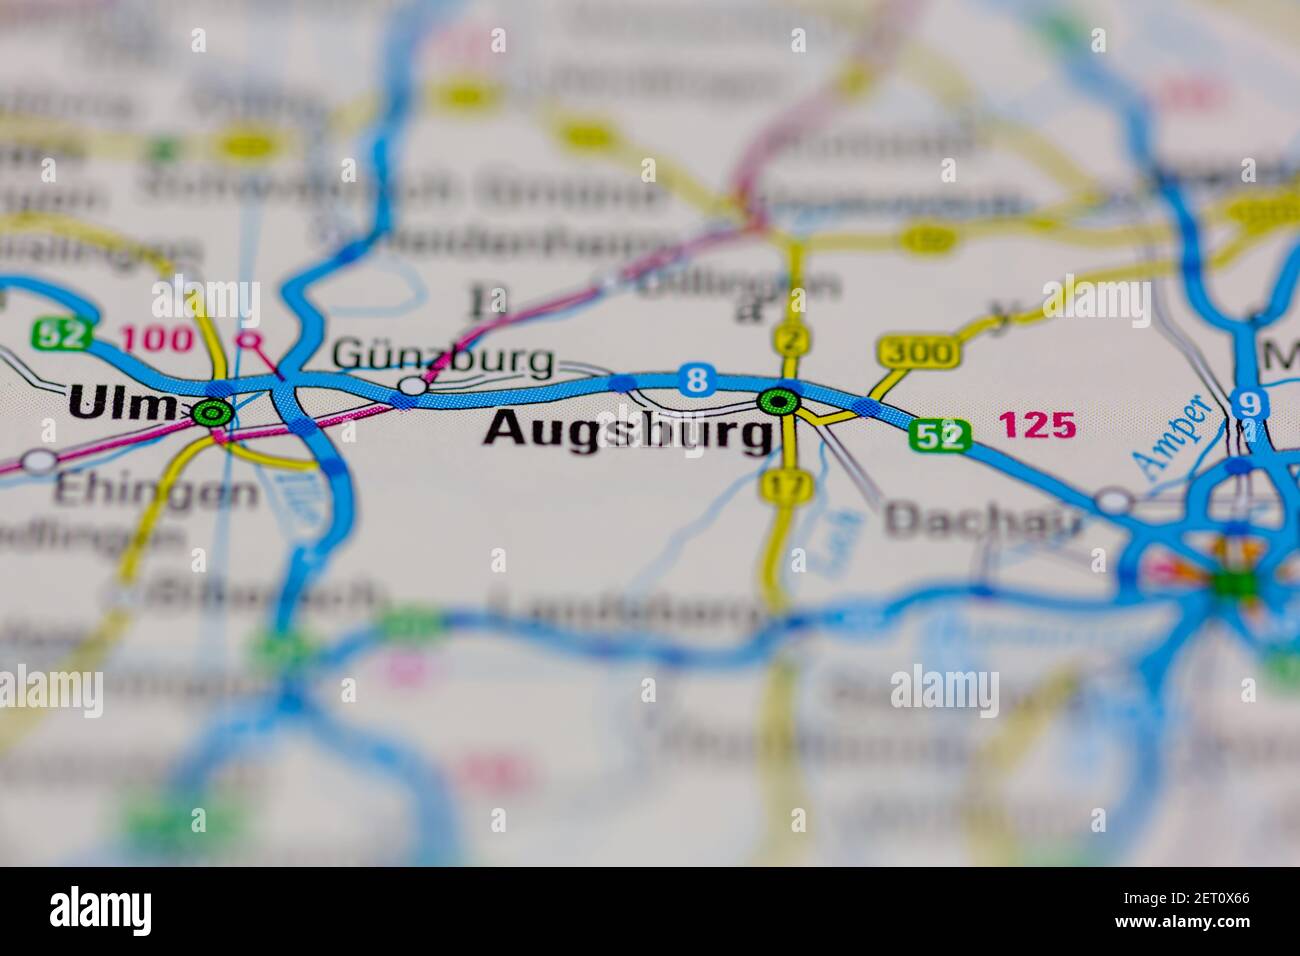 Augsburg Shown on a road map or Geography map Stock Photo